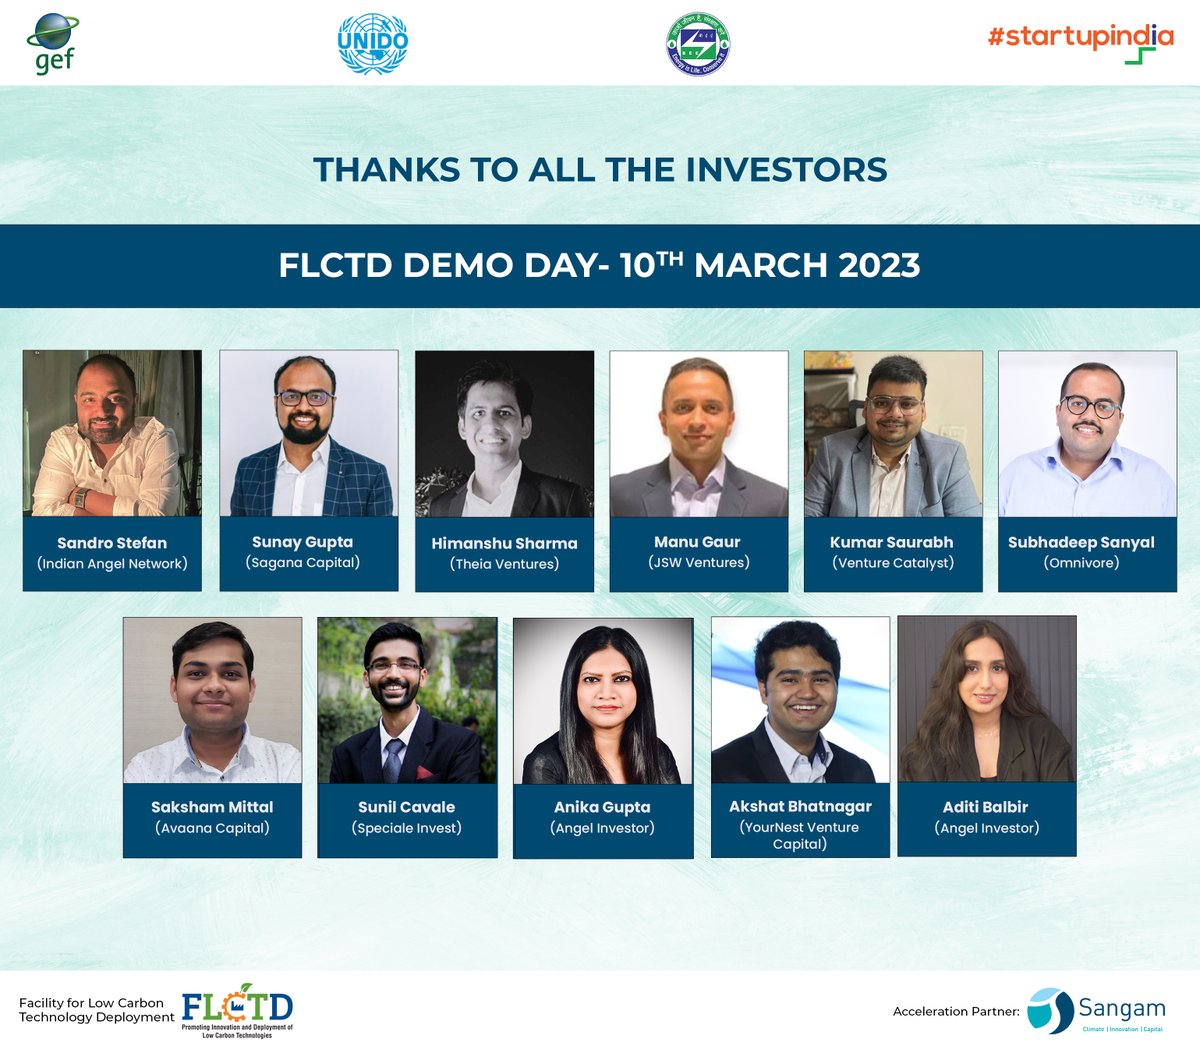 We would also like to thank all the investors for joining us for the #FLCTD Demo Day. We look forward to building a climate-positive society and enhancing the lives of millions of people with you!

#FLCTD #FLCTDAccelerator4 #Demoday #climatetech #cleantechnology #climatechange